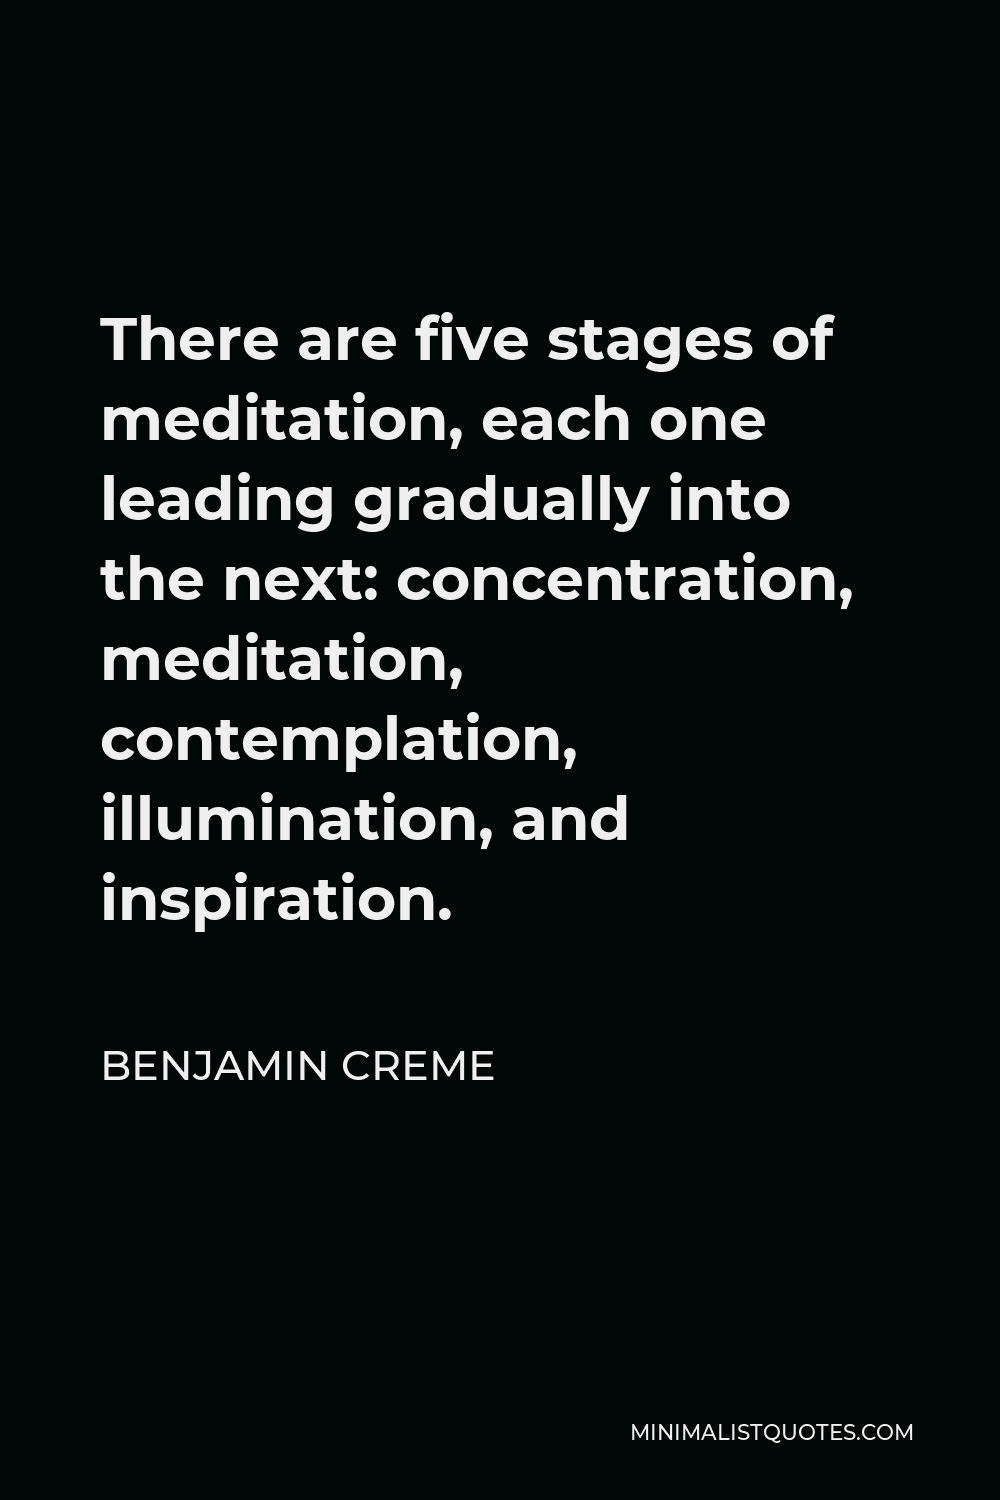 Benjamin Creme Quote - There are five stages of meditation, each one leading gradually into the next: concentration, meditation, contemplation, illumination, and inspiration.